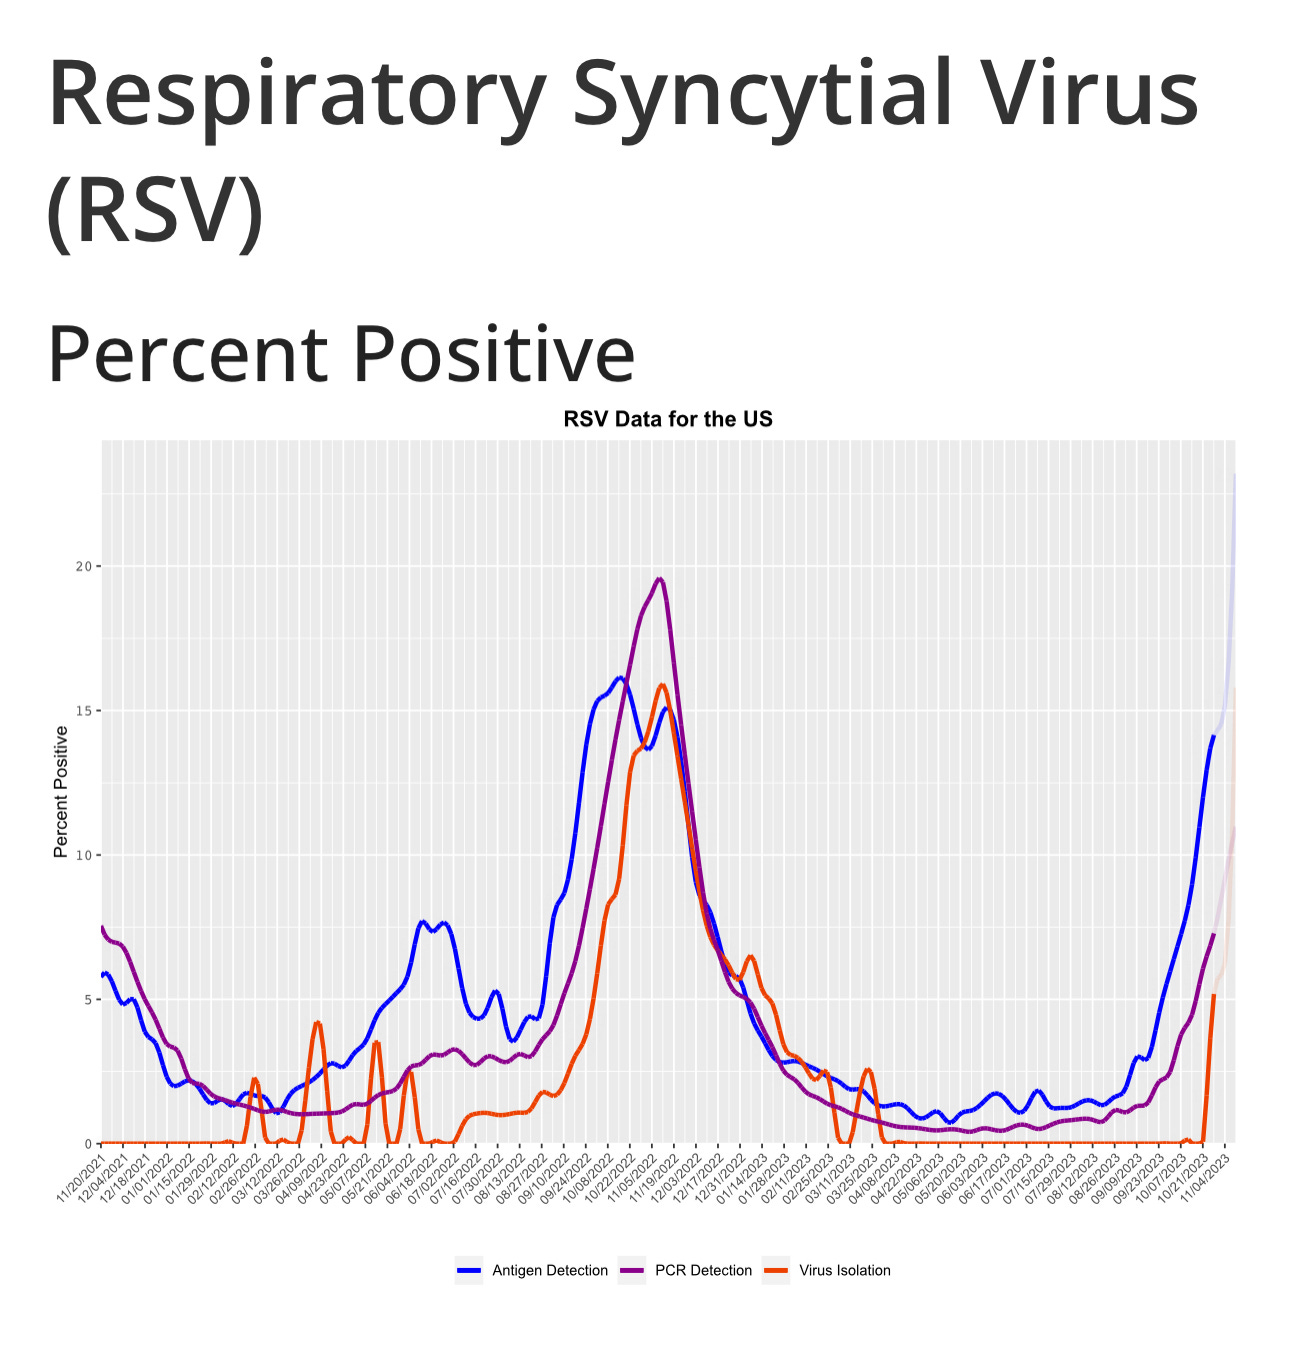 Chart of RSV cases by week over the past two years with sharp uptrend in the last 2-4 weeks.